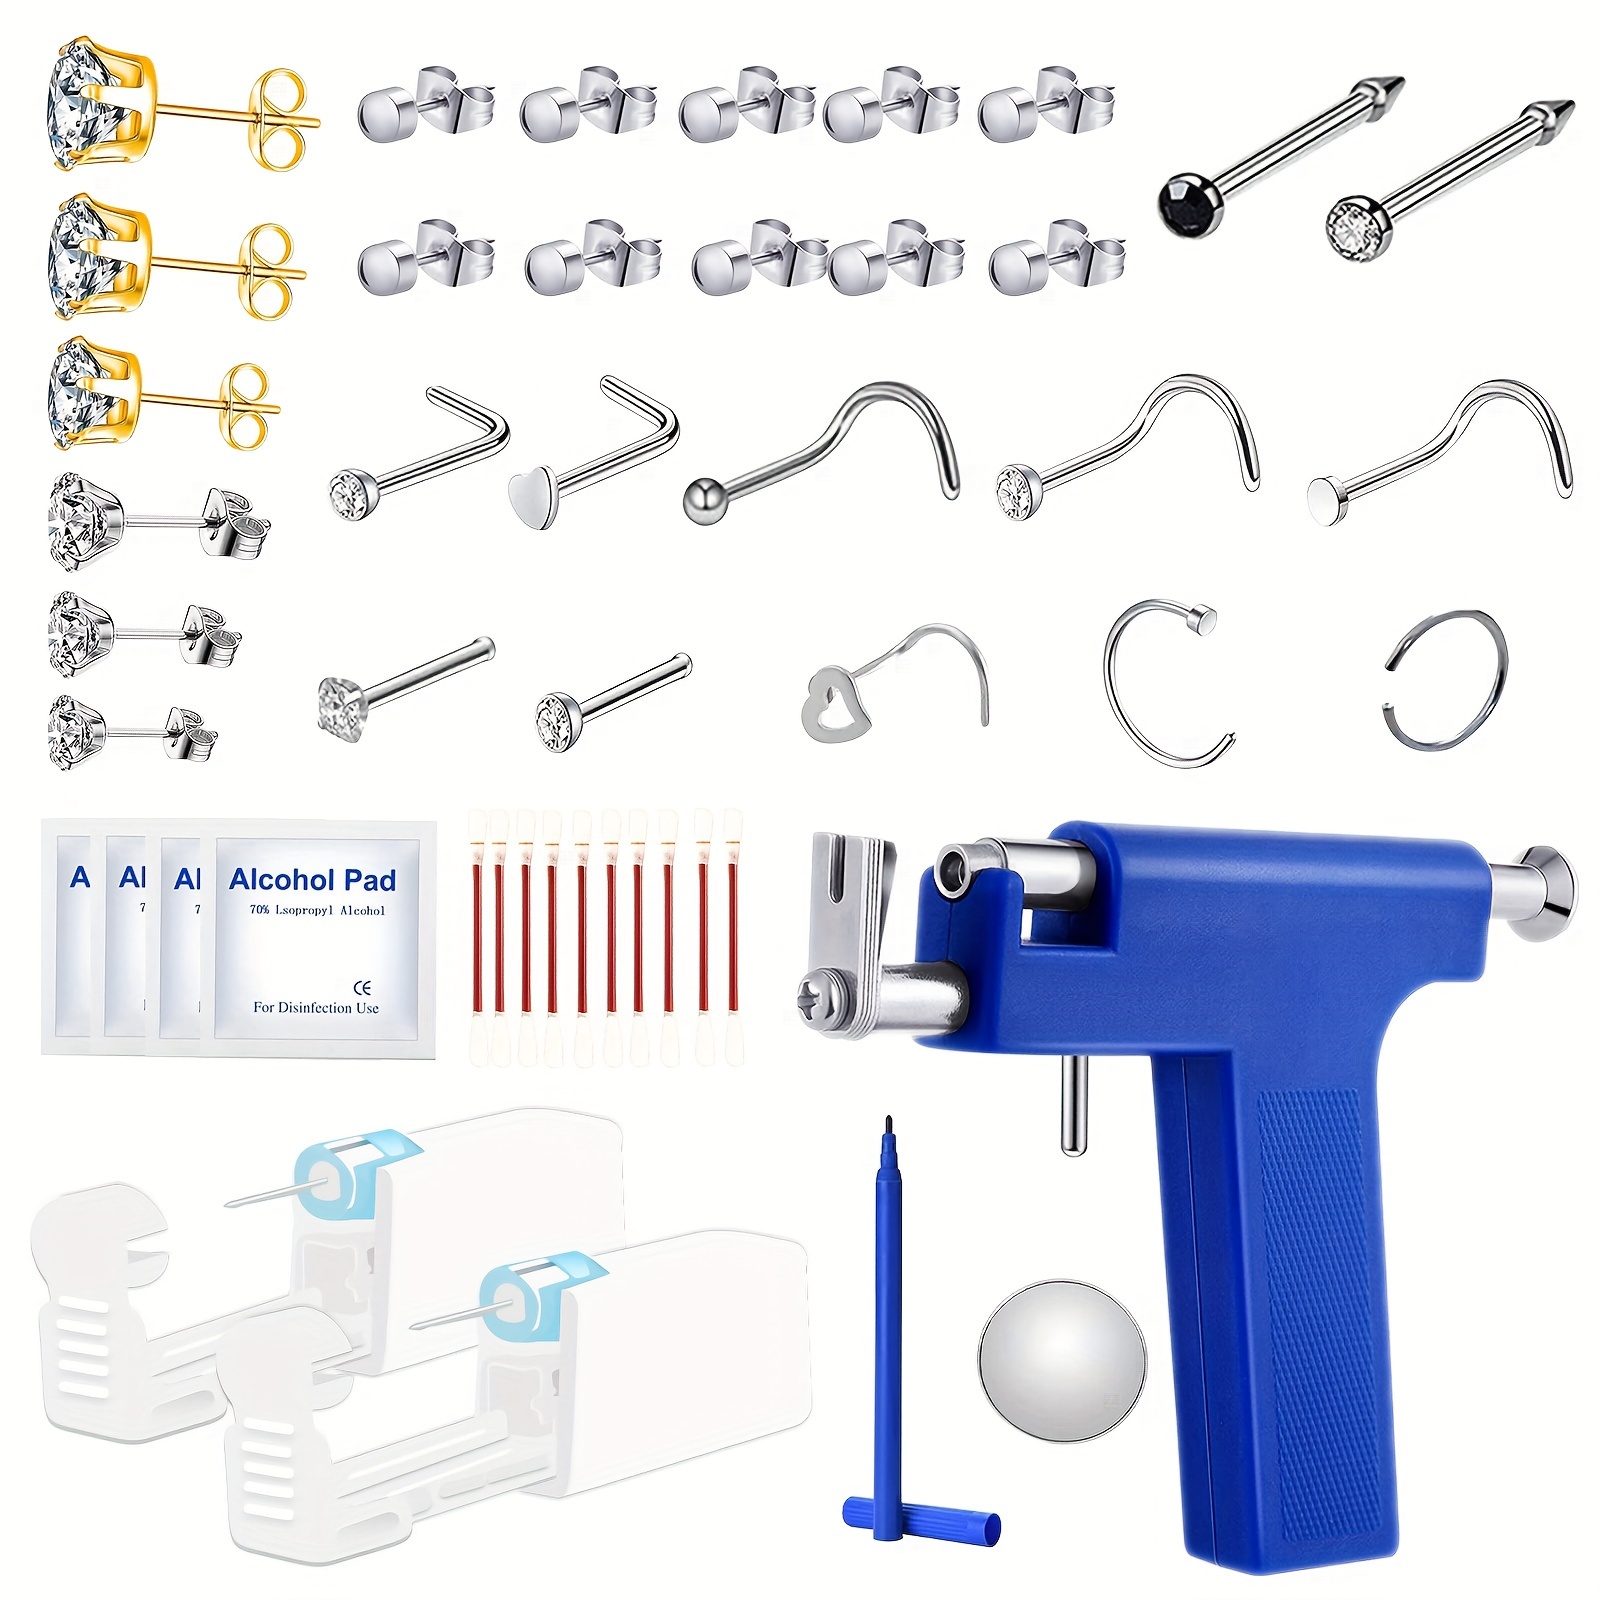 reusable ear piercing kit needles button piercing kit with silver earrings with free 2 pcs self nose piercing gun kit safety nose piercing kit tool and 10pcs nose rings